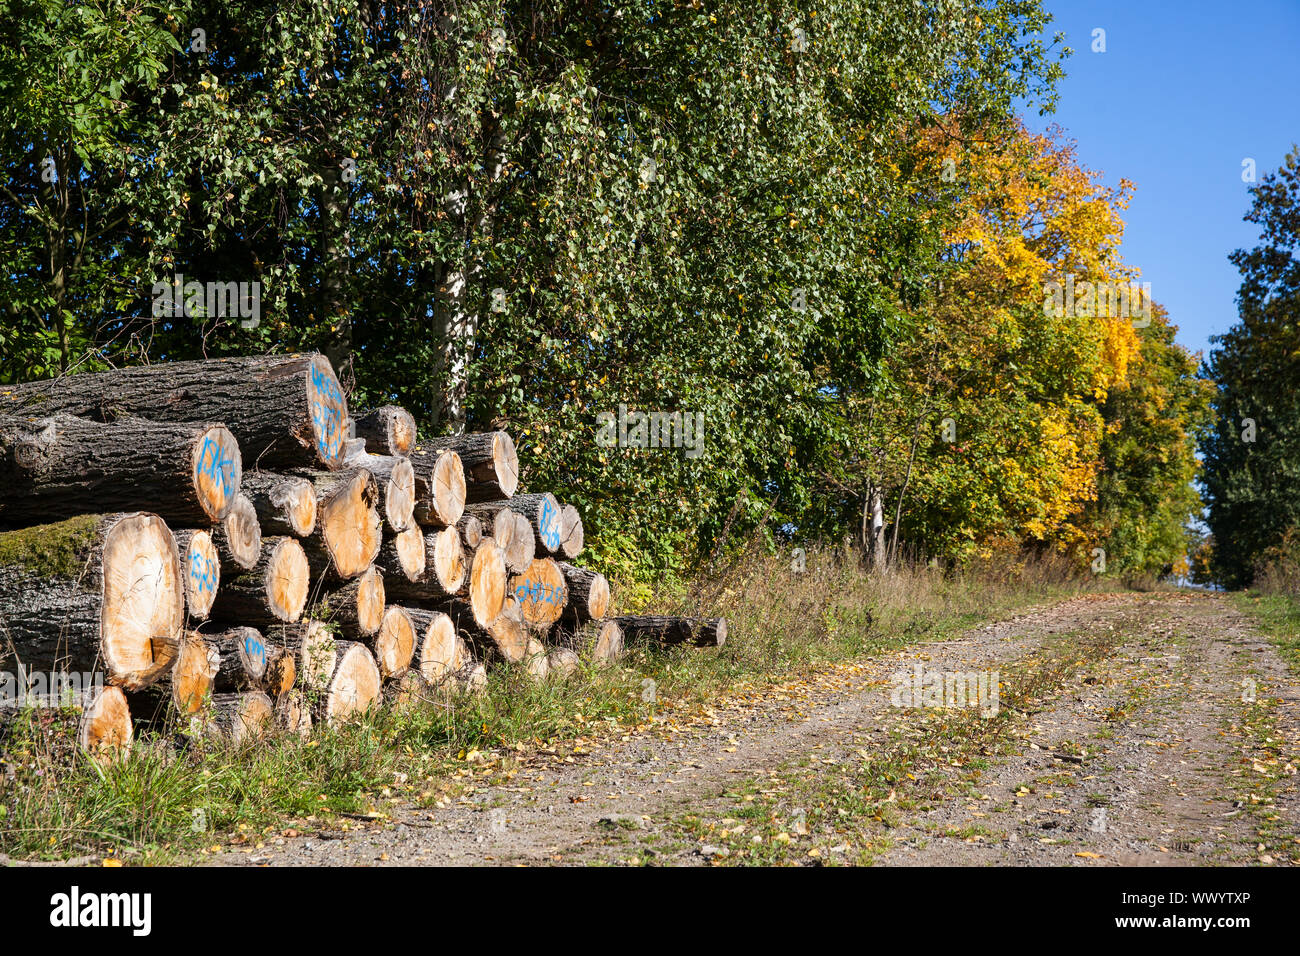 Forest path with wooden poles in autumn Stock Photo